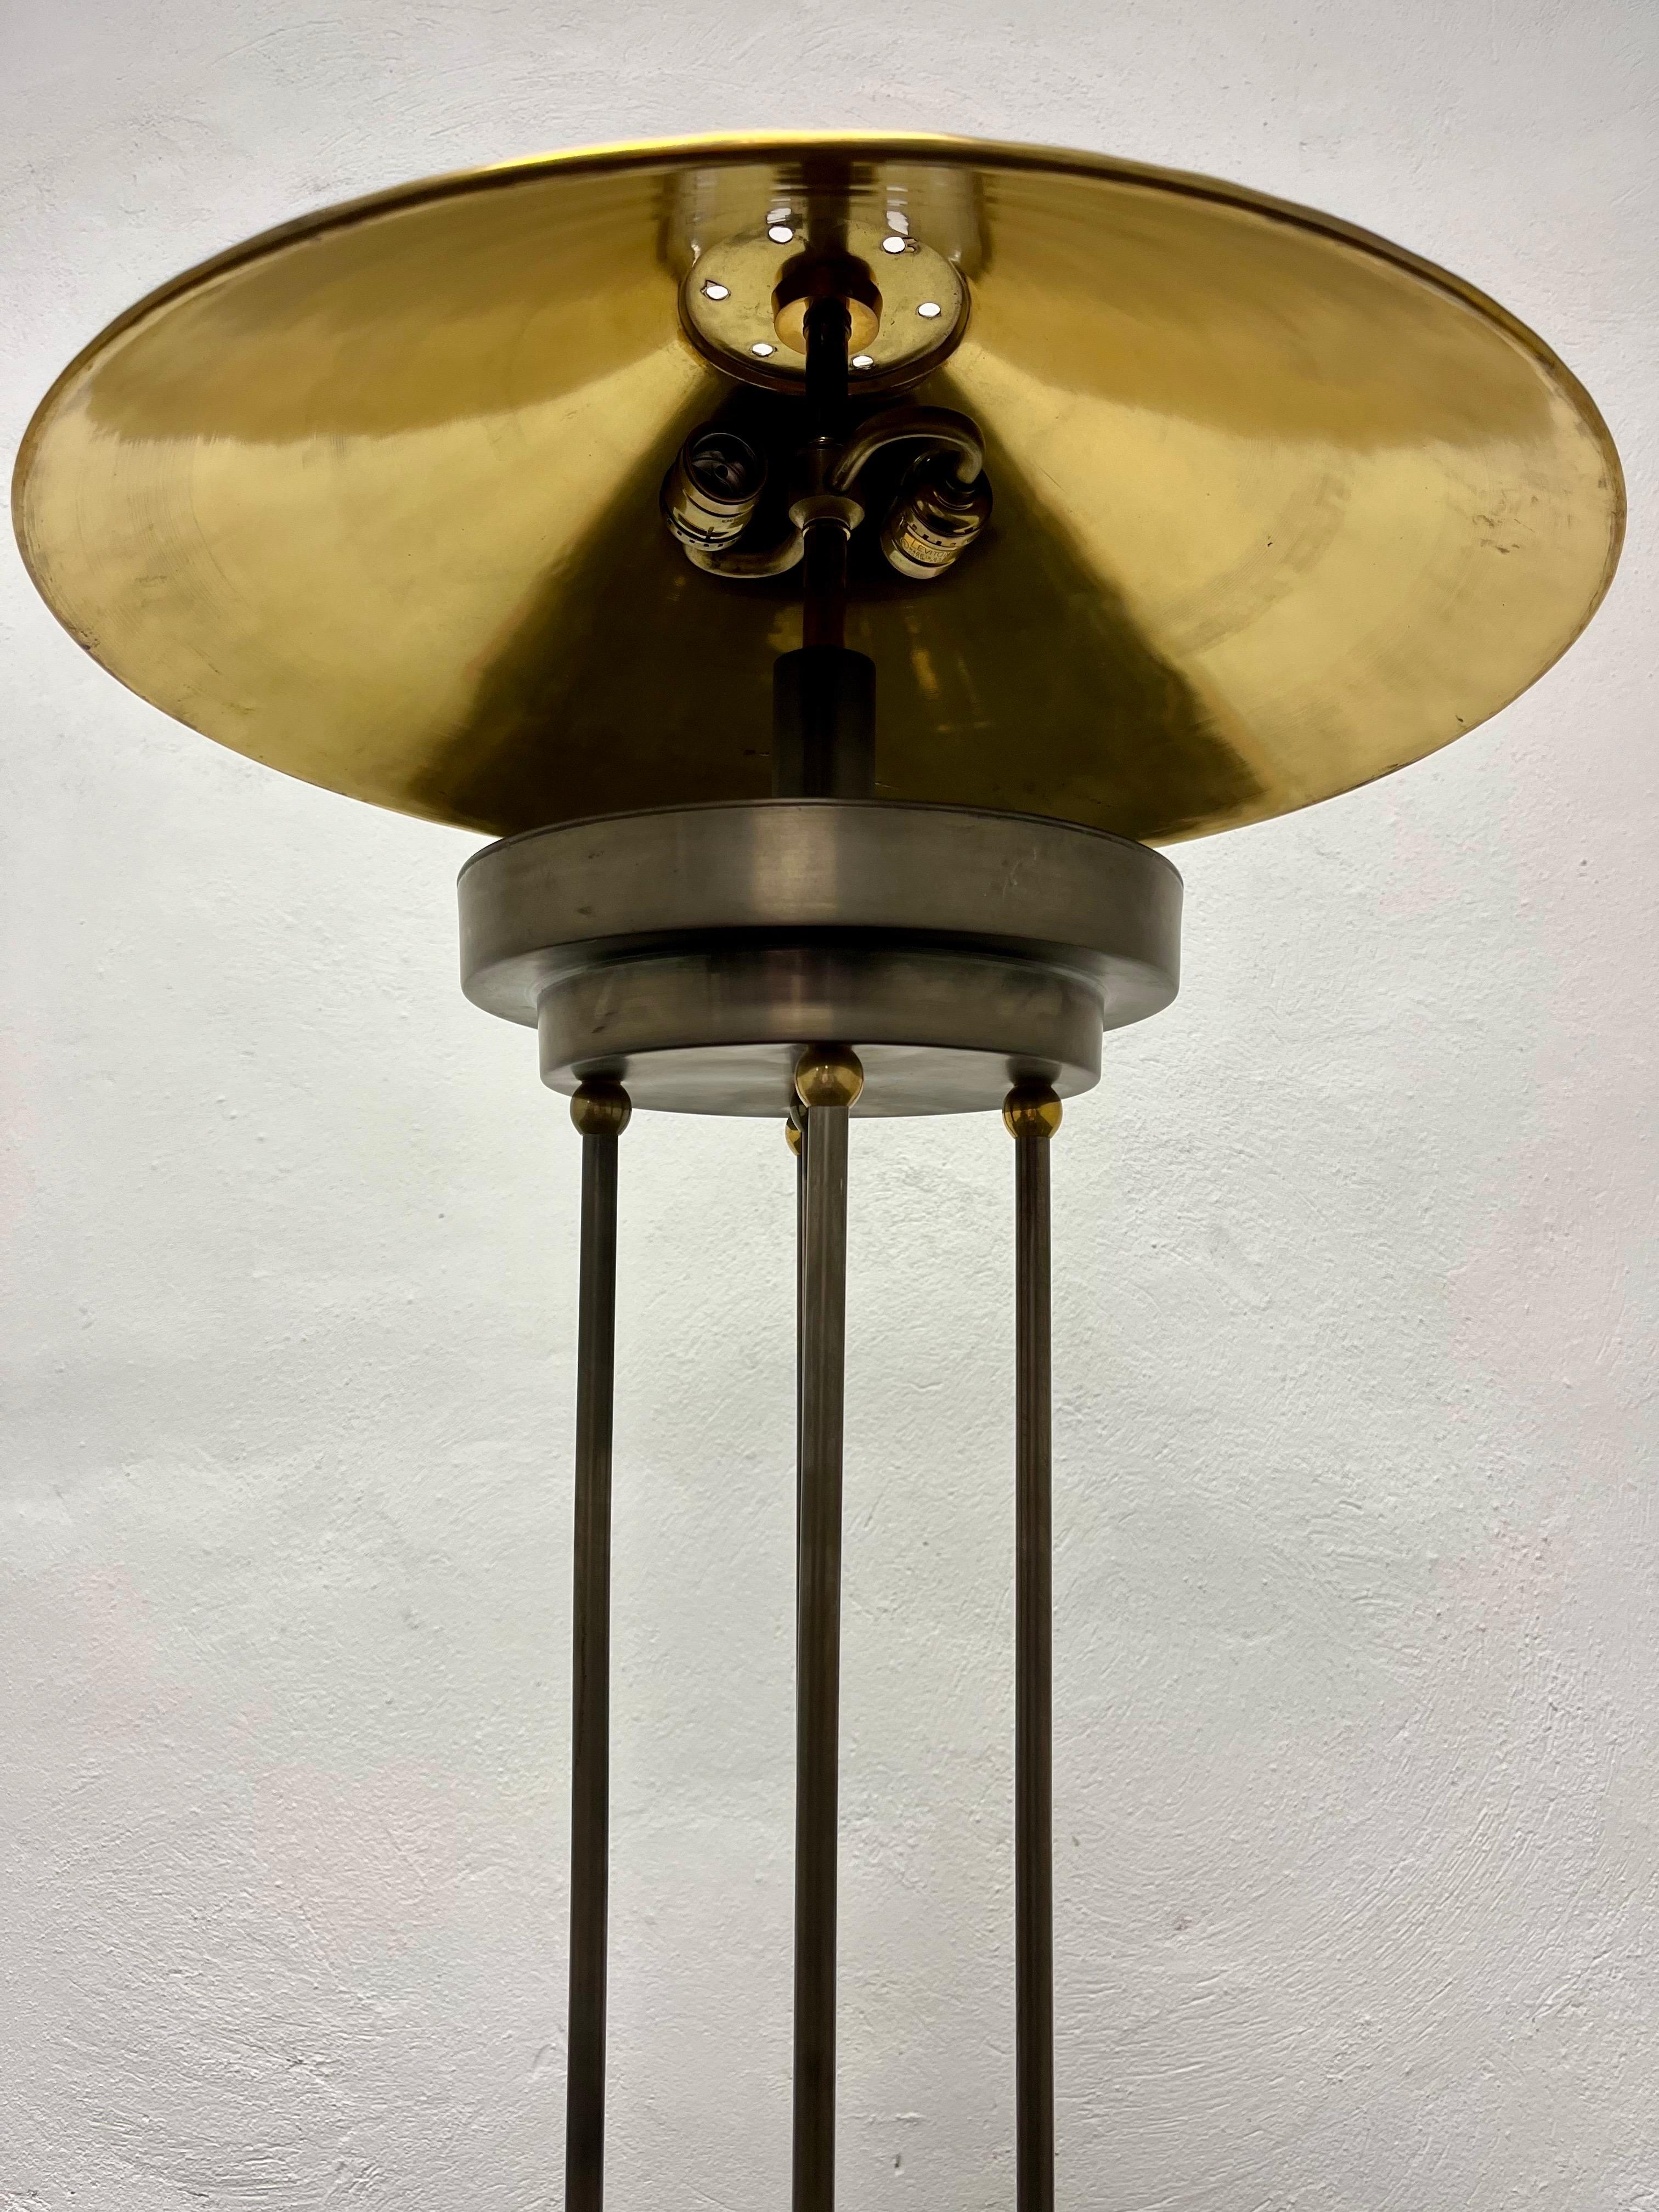 Vintage Postmodern Brushed Steel and Brass Column Floor Lamp Metal Shade In Good Condition For Sale In W Allenhurst, NJ